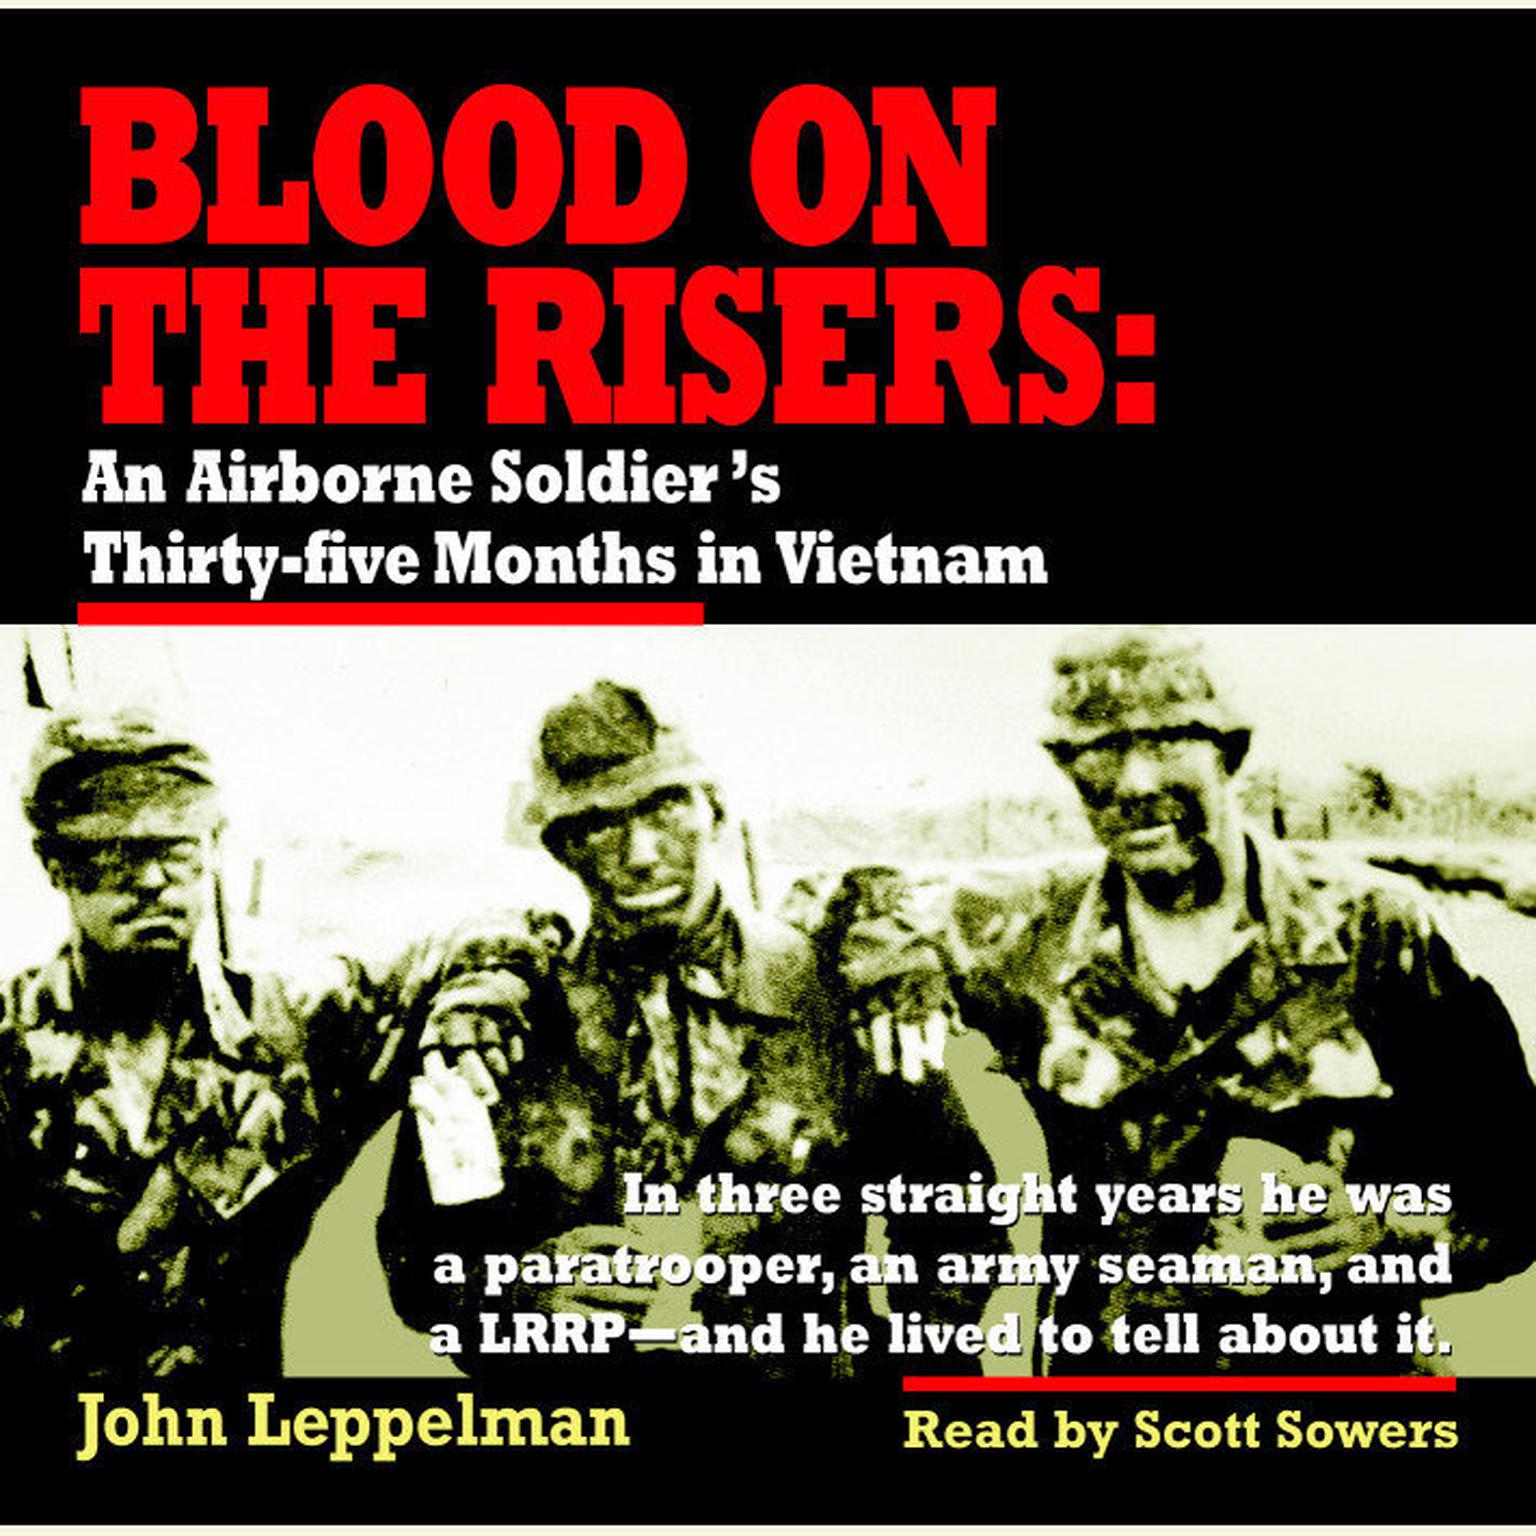 Blood on the Risers (Abridged): An Airborne Soldiers Thirty-five Months in Vietnam Audiobook, by John Leppelman